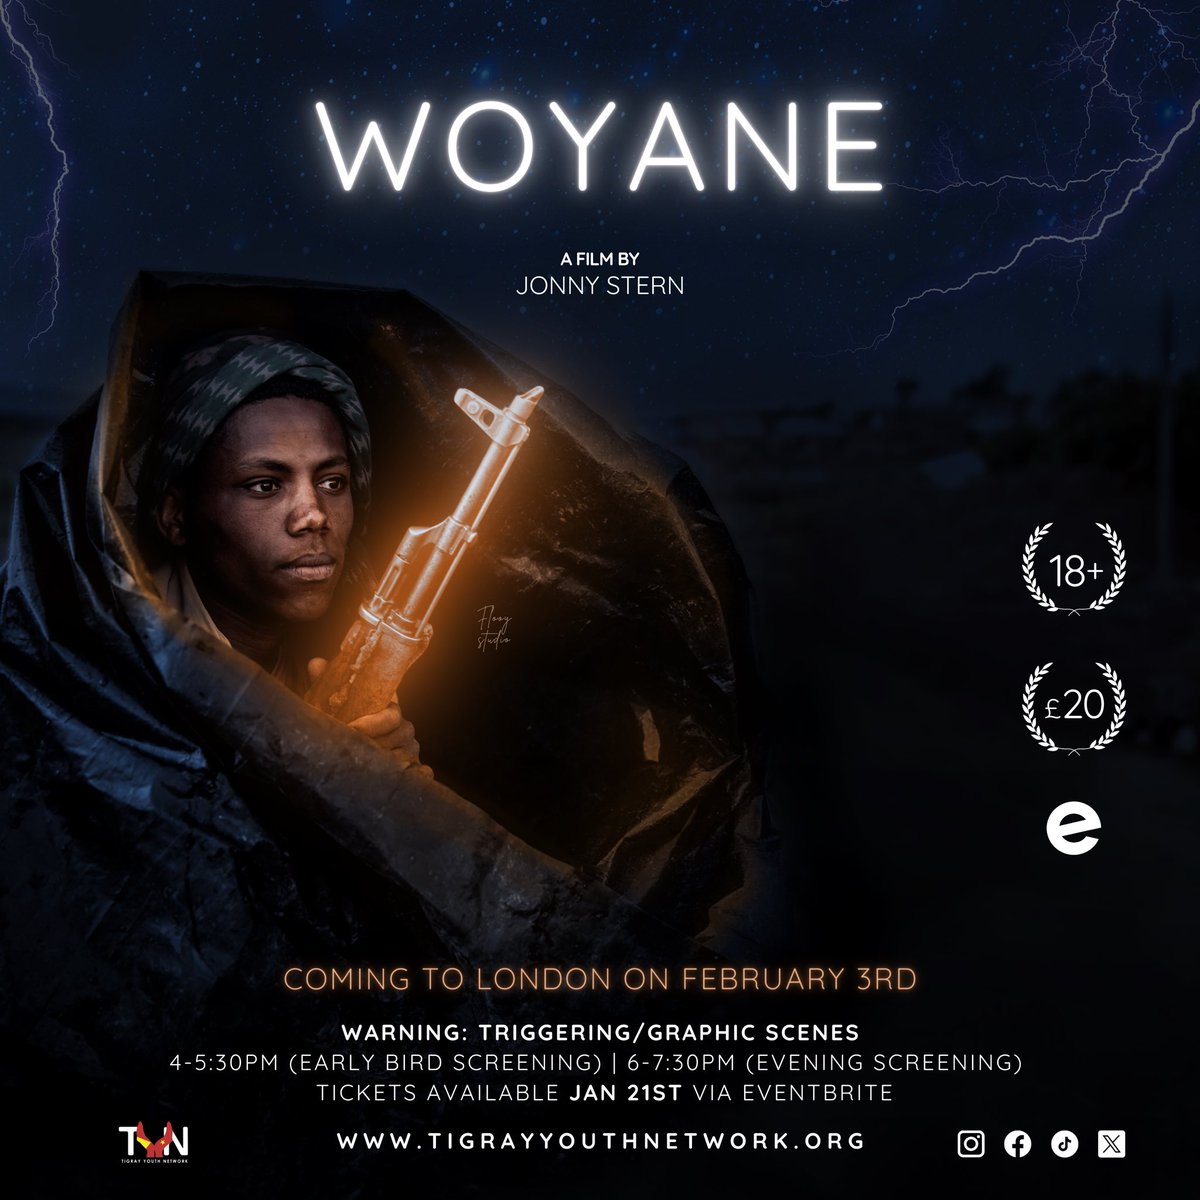 Join us for an engaging evening of thought-provoking cinema and insightful conversation at our exclusive screening event featuring the short documentary 'Woyane' by @jonnyst. Tickets will be available Sunday 21st January.